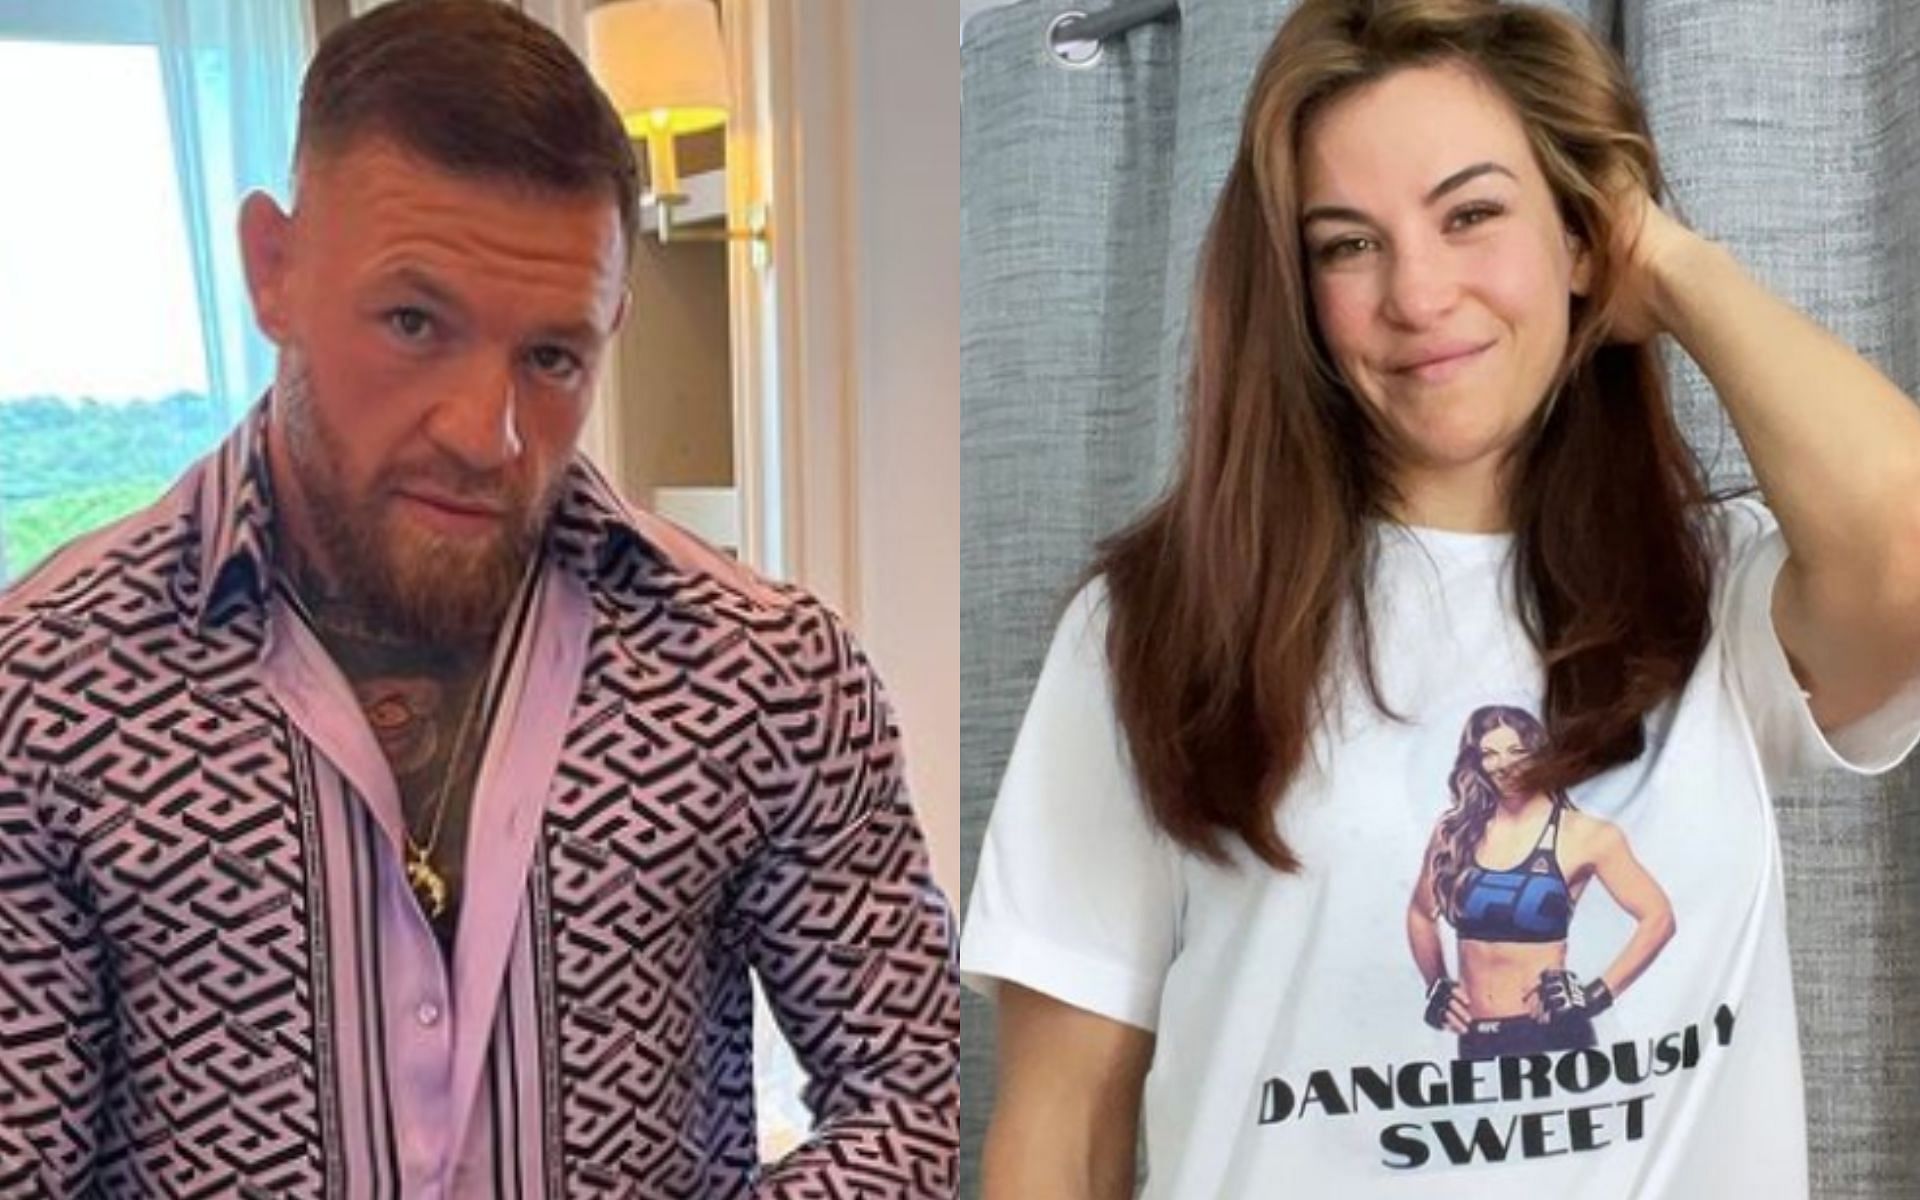 Conor McGregor (right), Miesha Tate (left) [Images courtesy of @mieshatate and @thenotoriousmma on Instagram]